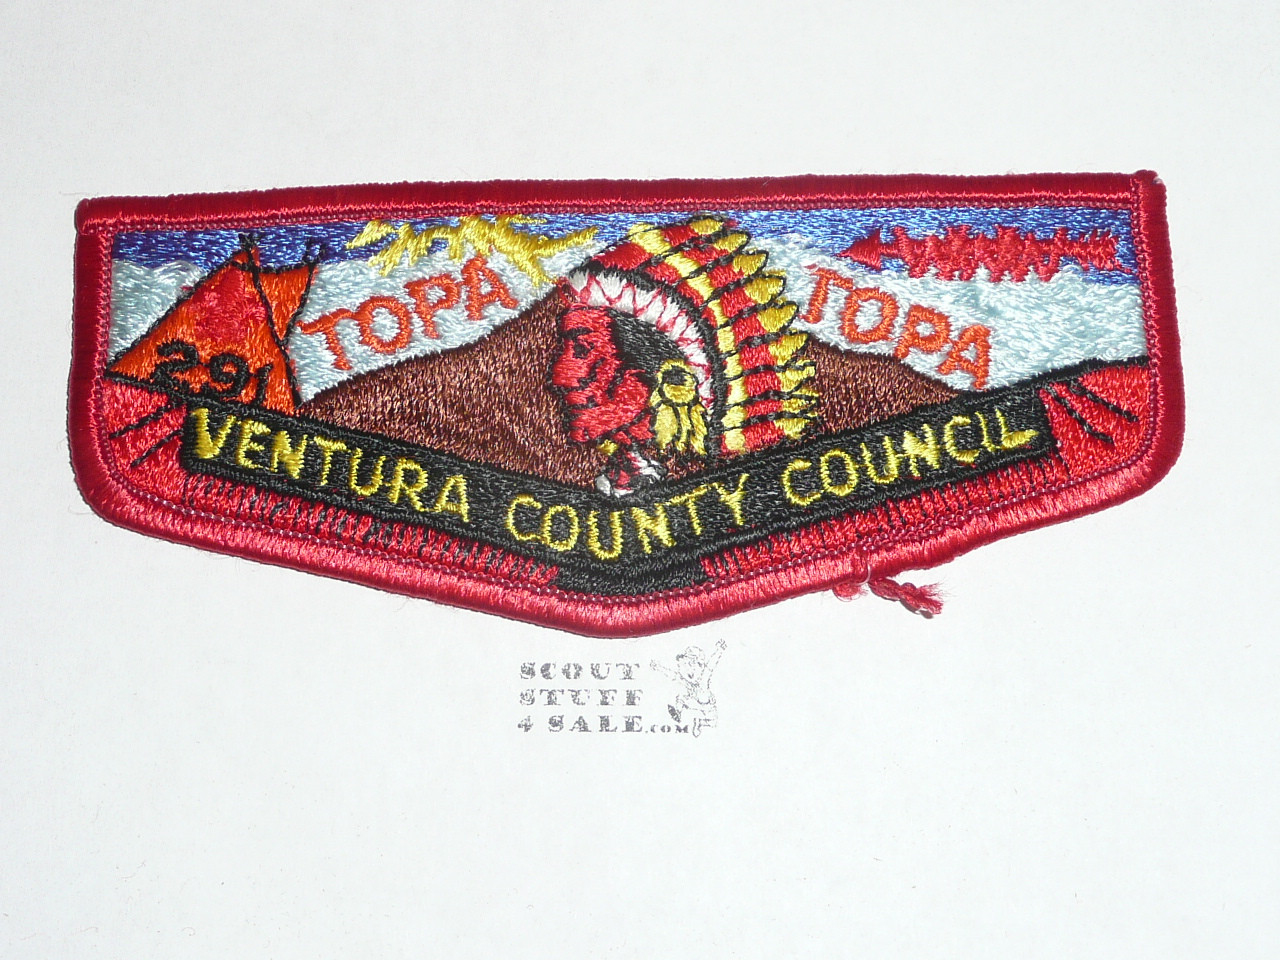 Order of the Arrow Lodge #291 Topa Topa s7 Flap Patch